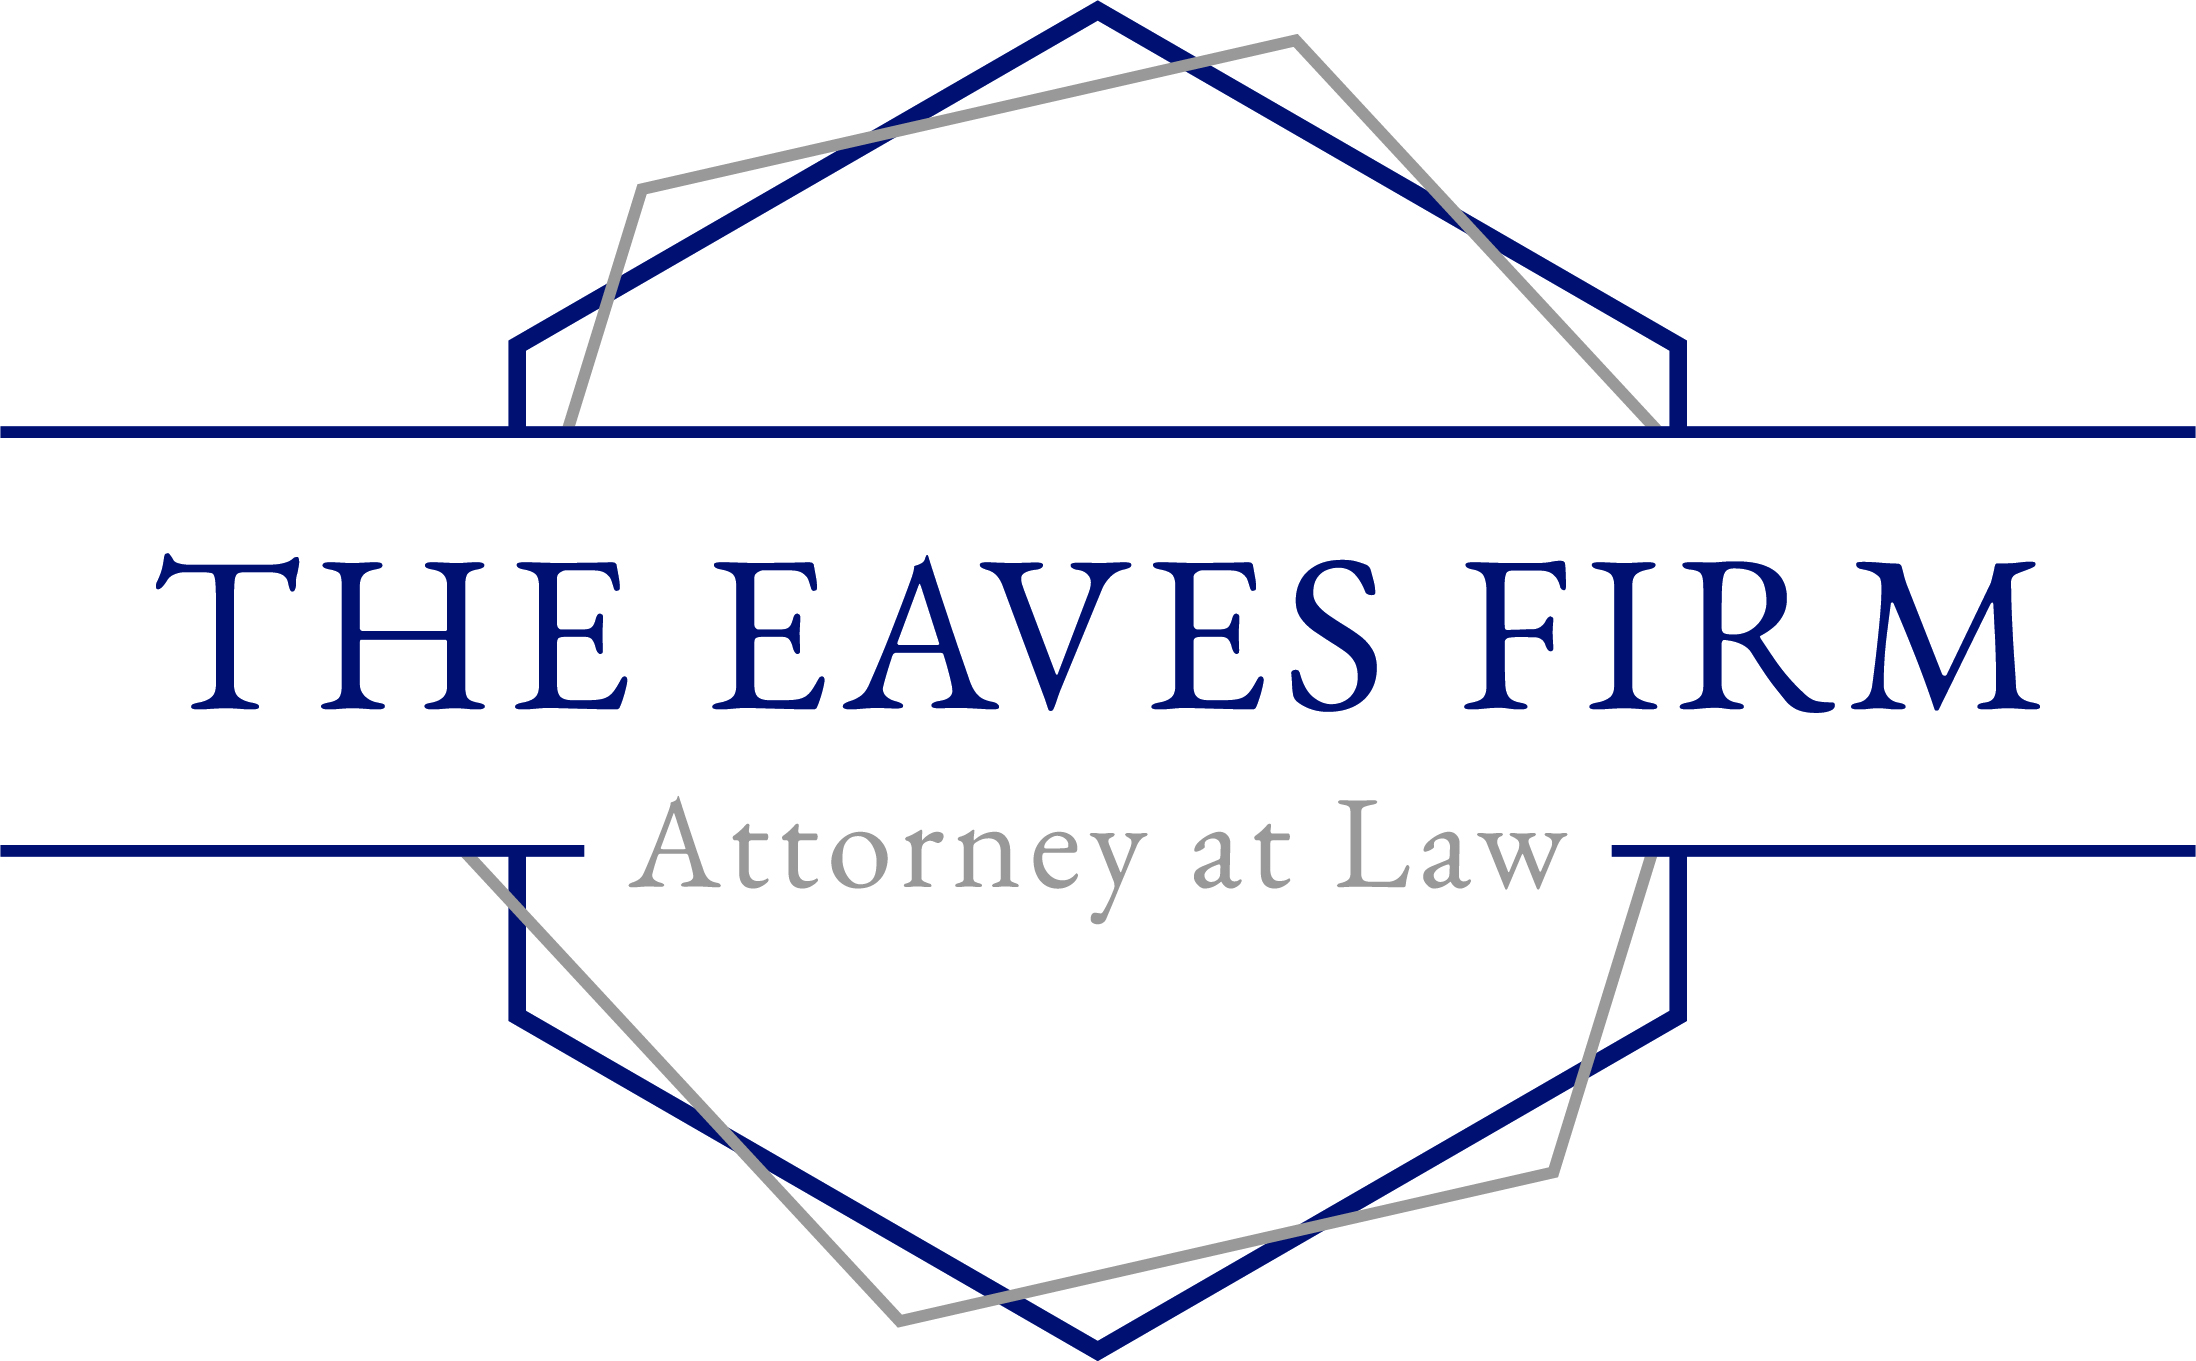 The Eaves Firm